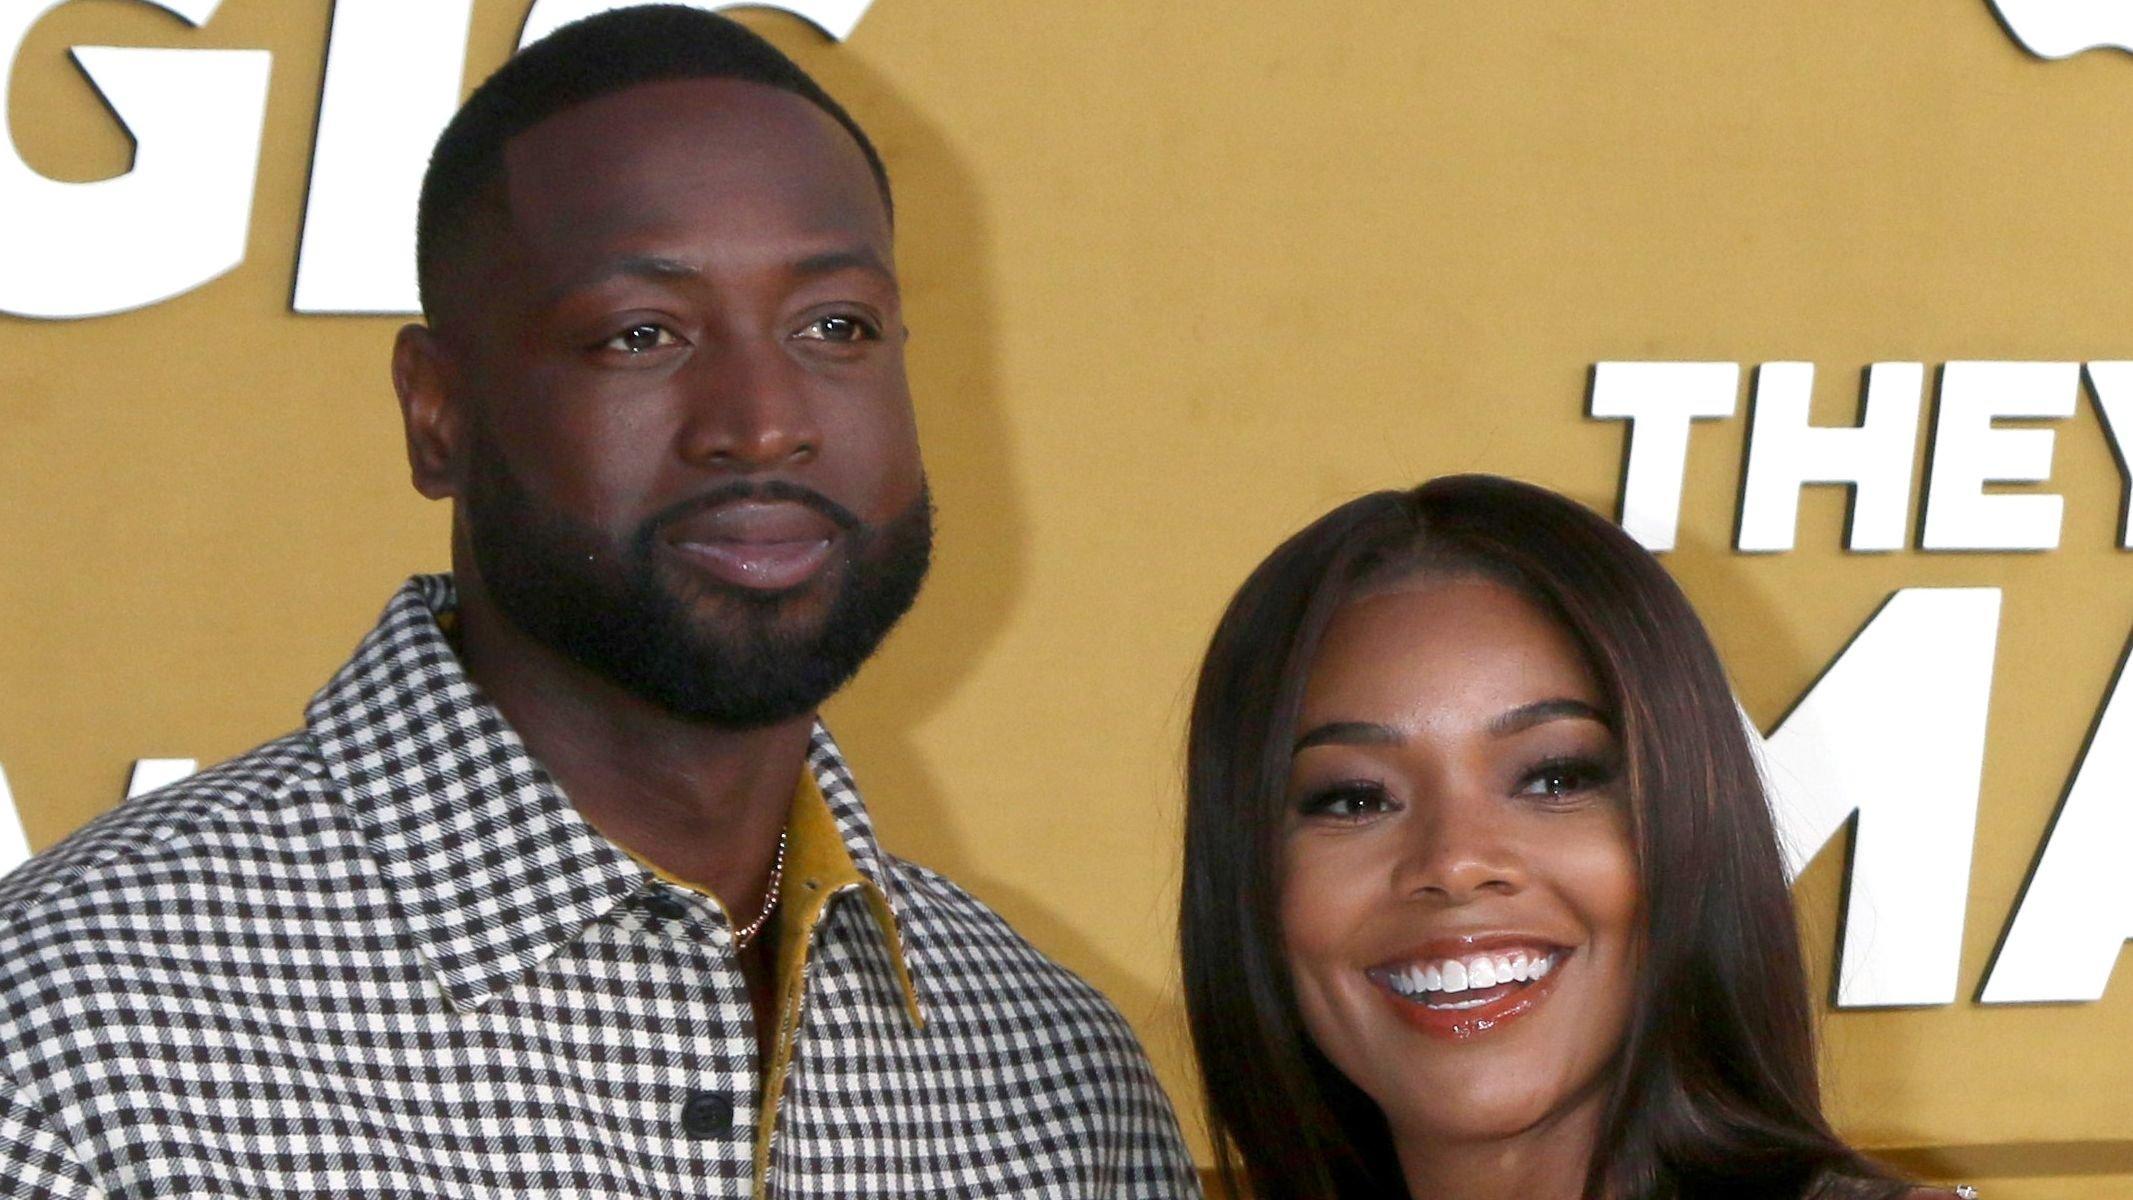 Gabrielle Union and Dwyane Wade celebrate 8 years as a couple